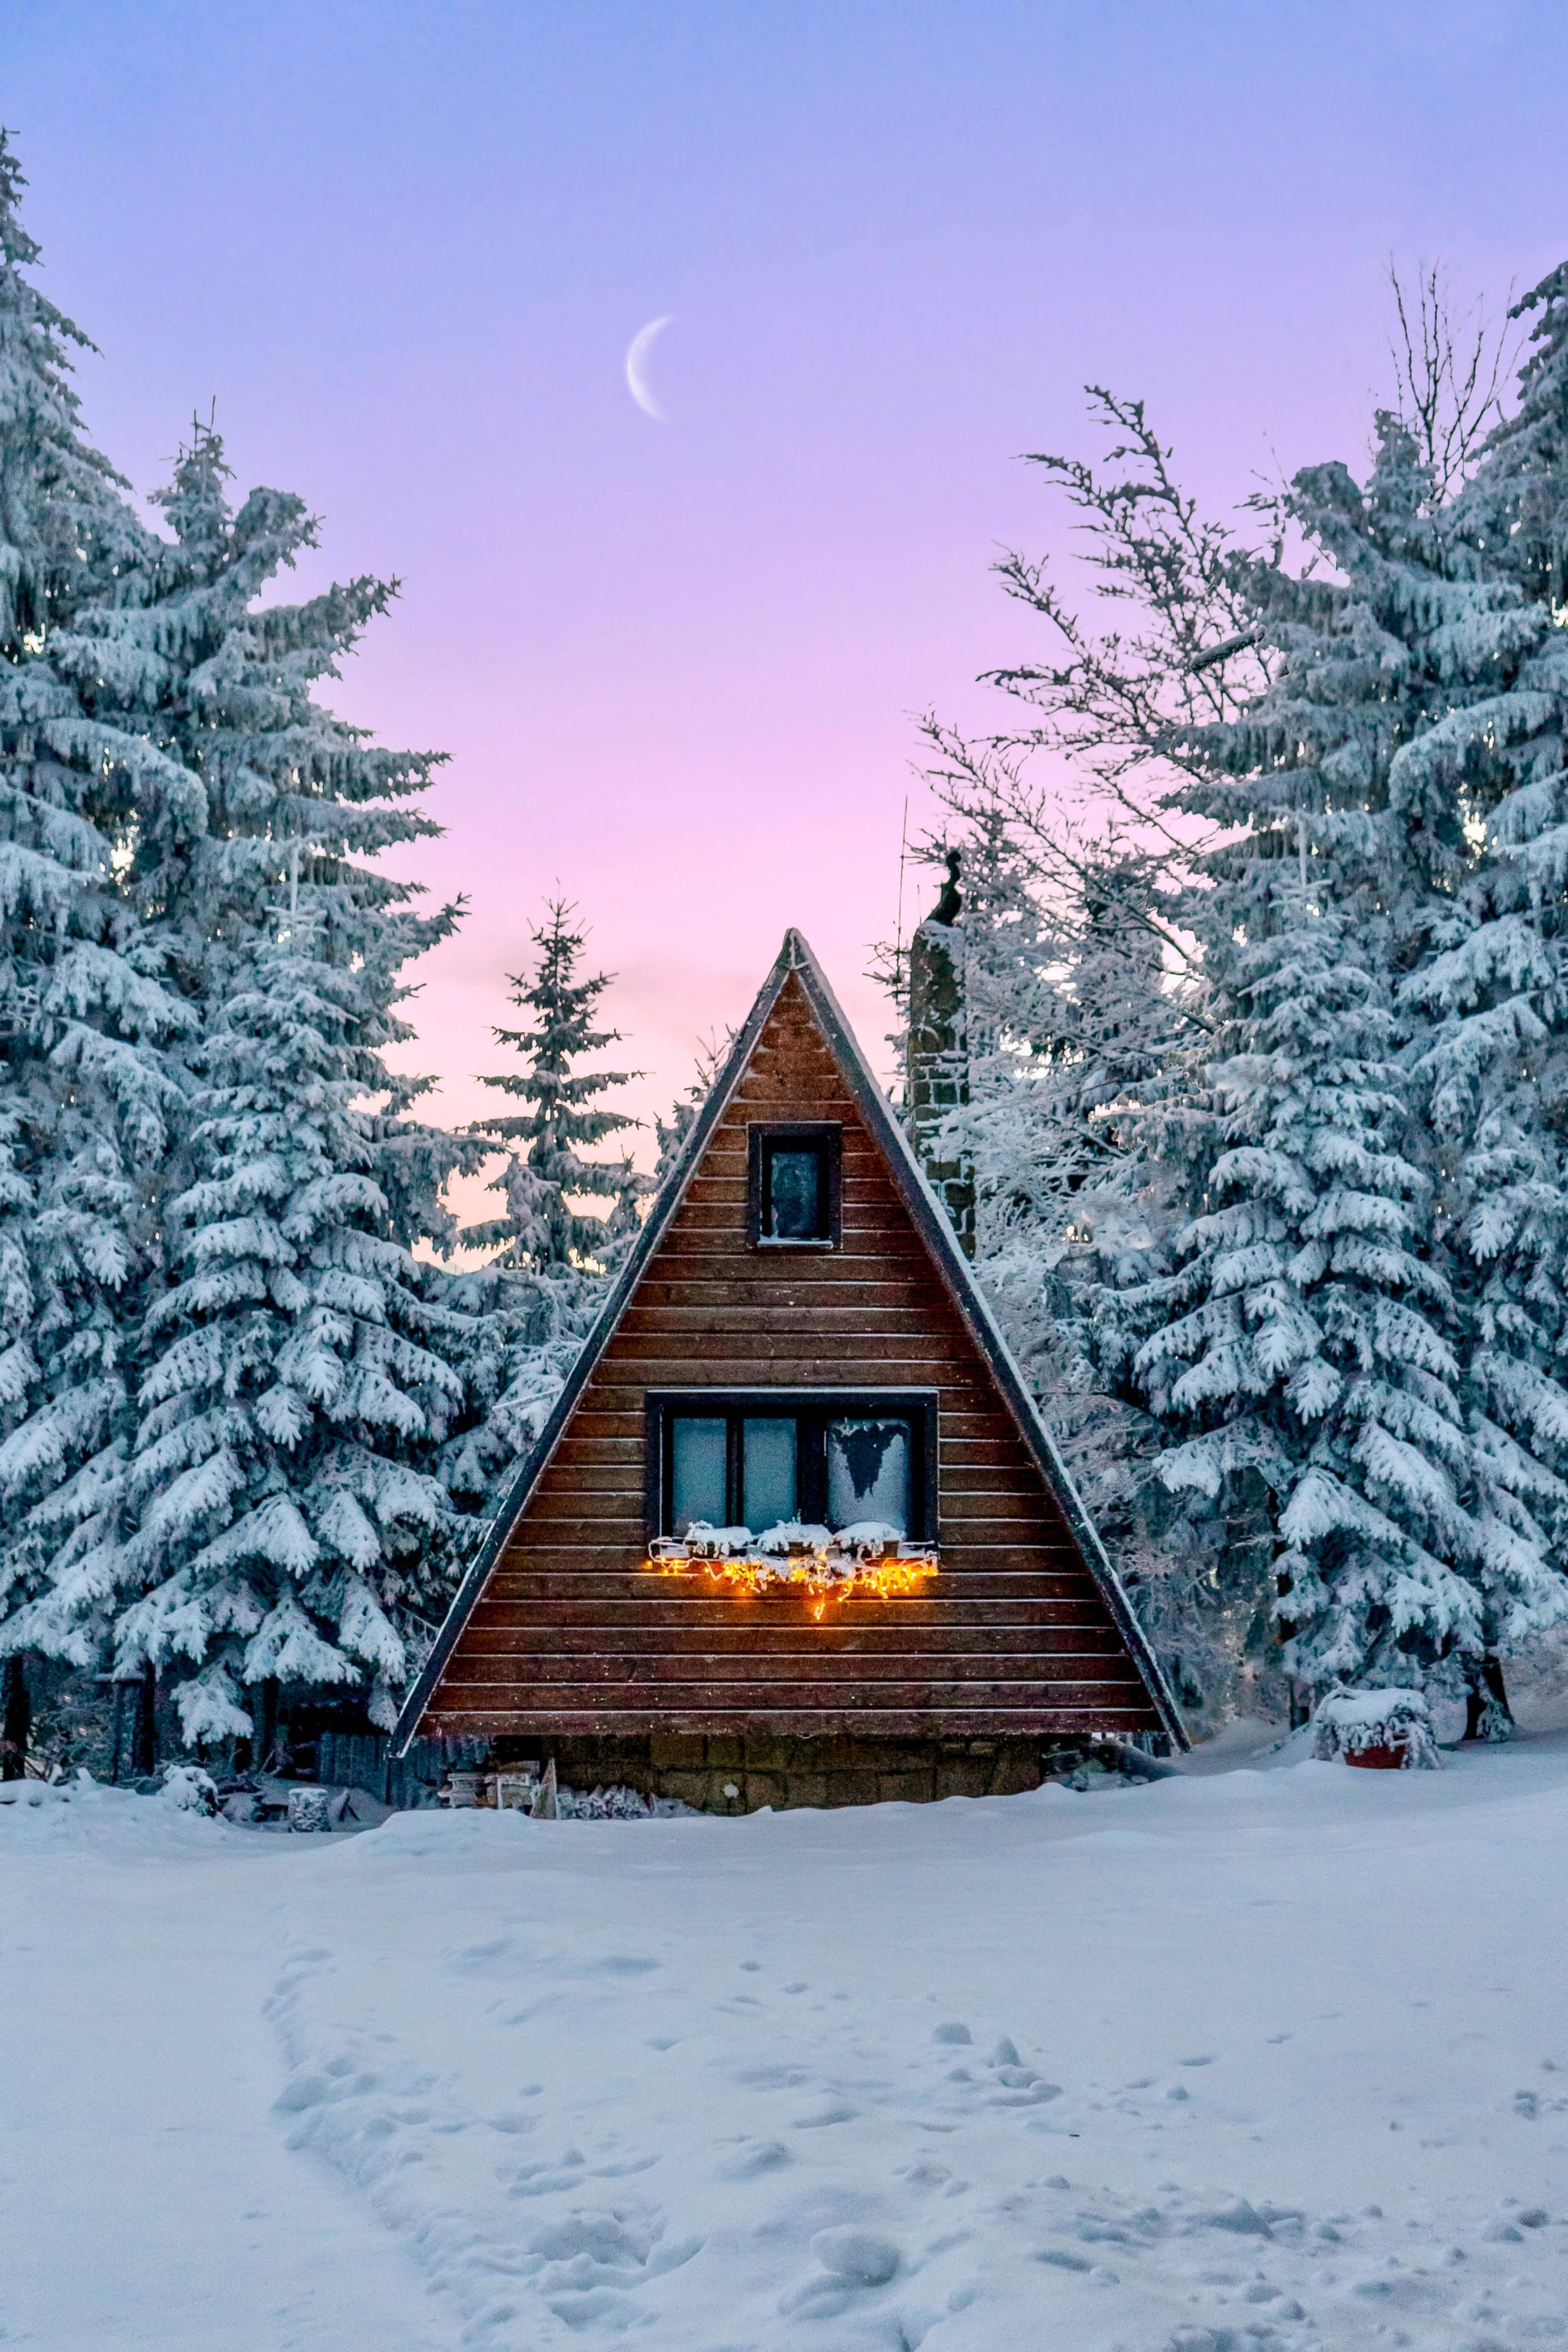 iPhone Christmas Wallpaper: Winter Cabin Christmas Wallpaper That Are Perfect For Your Home Screen